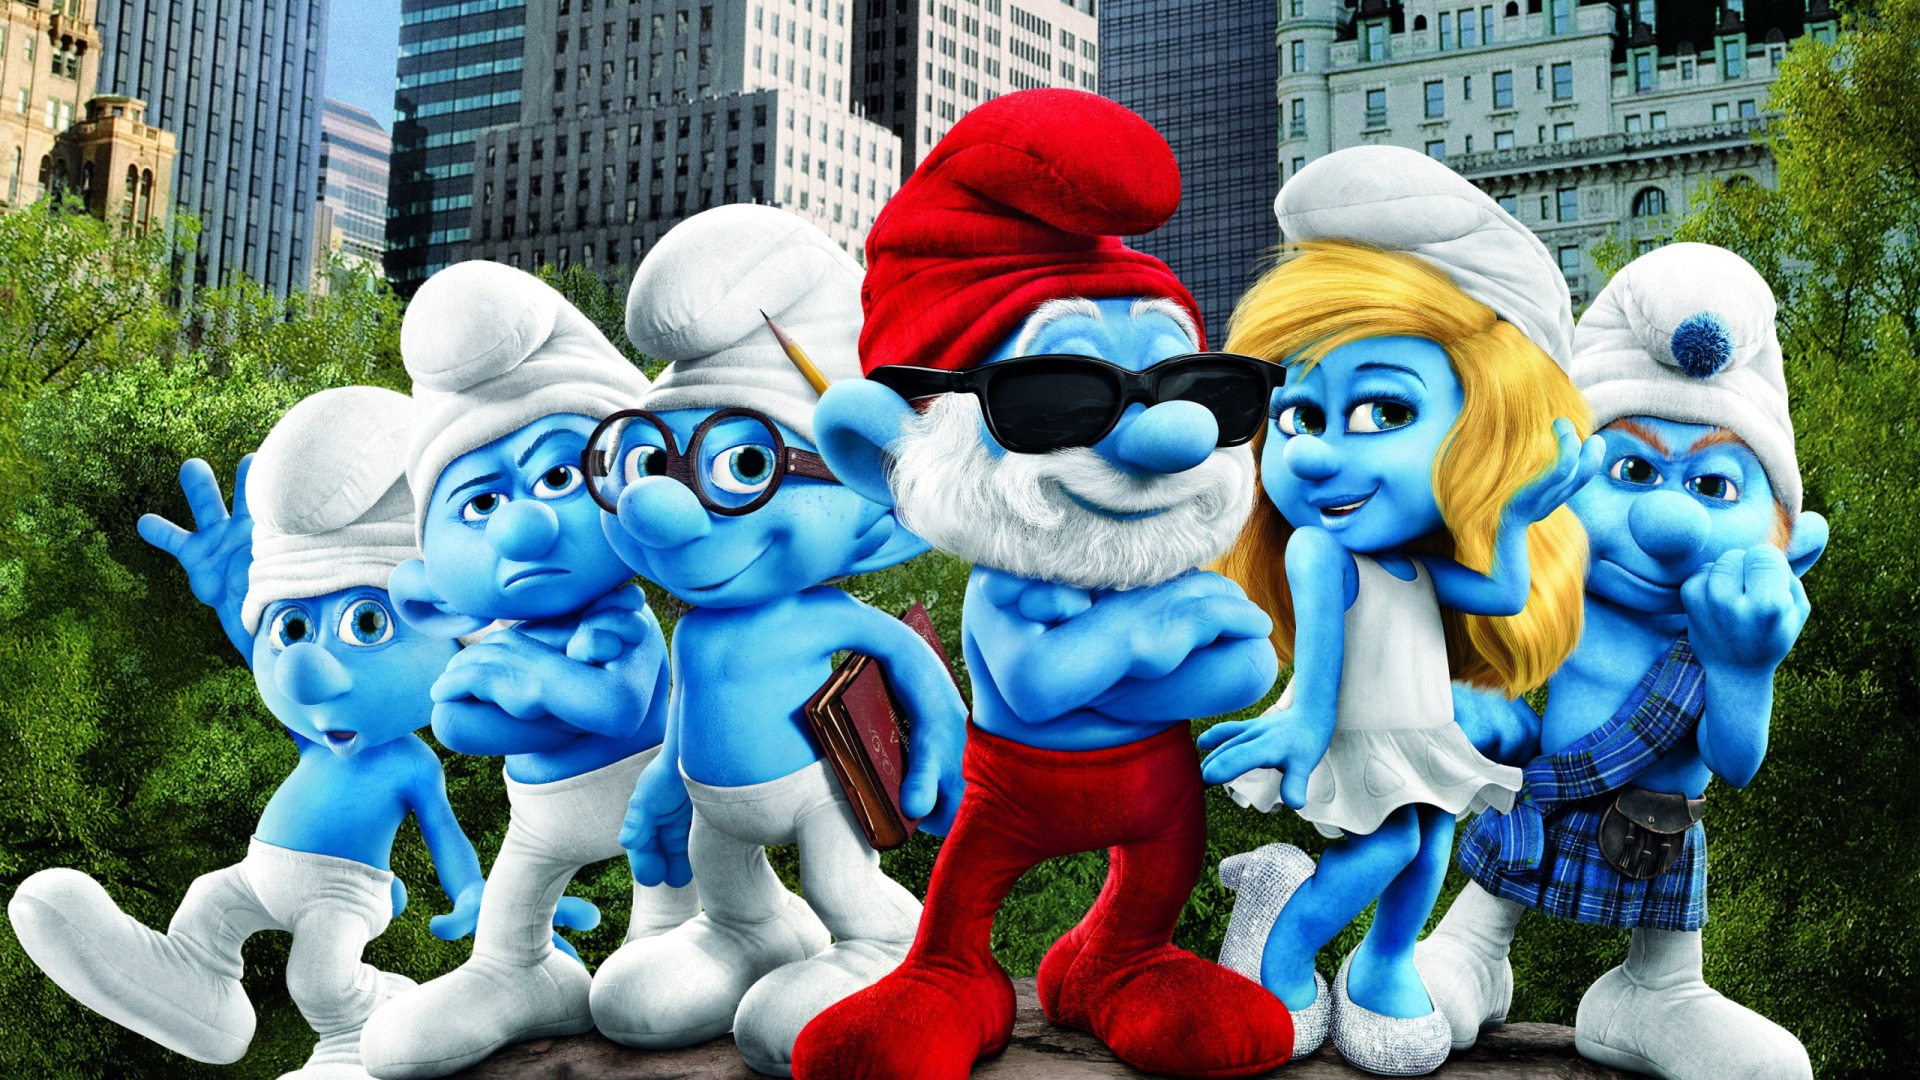 The smurfs video game